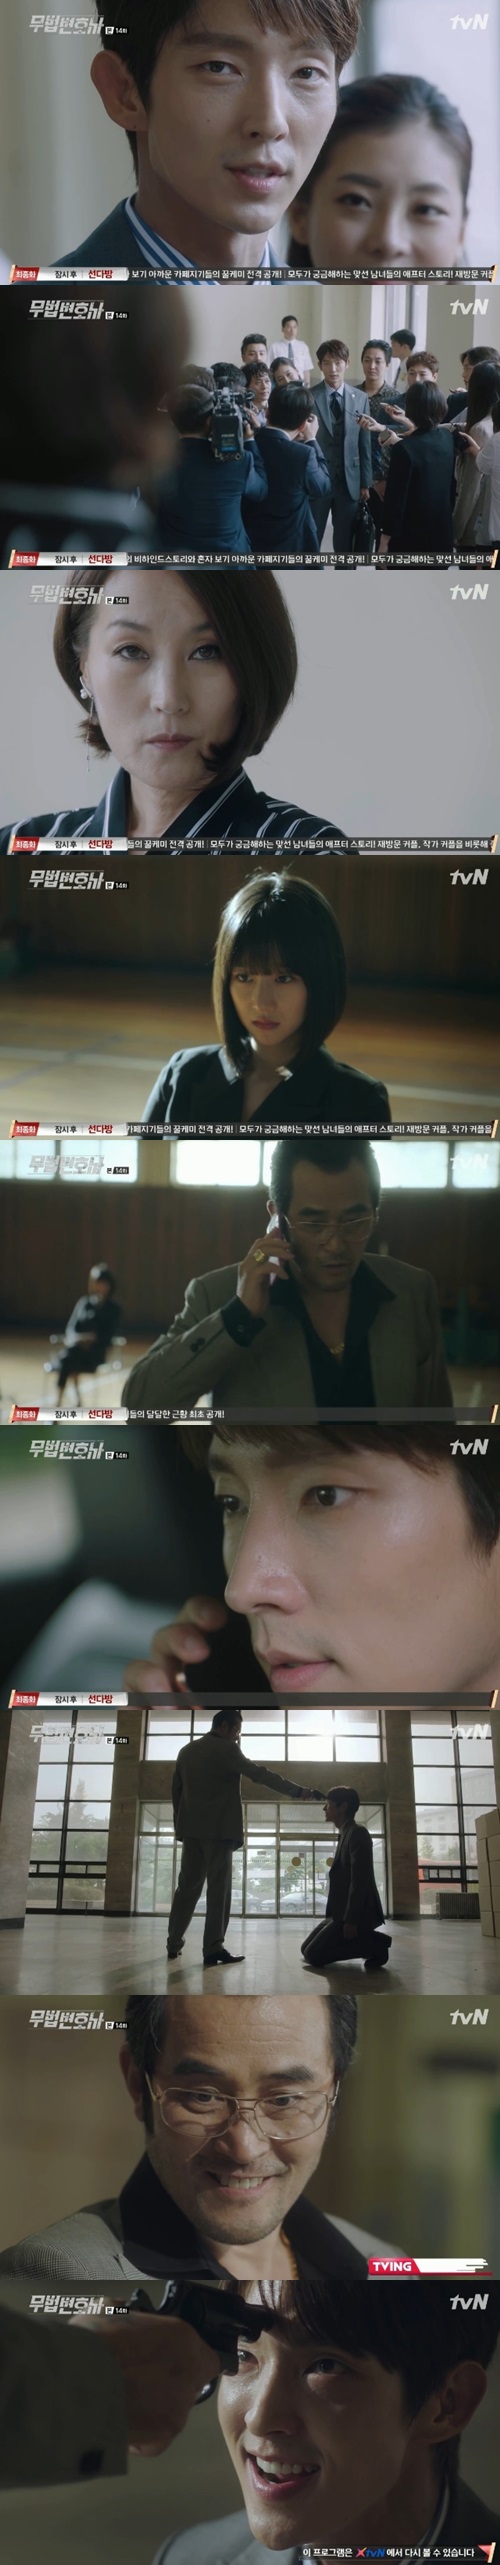 Lee Joon-gi was hit by Danger after being hit by Lee Hye-Yeong and counterattacked by Choi Min-soo.In the 14th episode of TVNs weekend drama Lawless Lawyer (playplayed by Yoon Hyun-ho/directed by Kim Jin-min), which was broadcast on June 24, Bong Sang-pil (played by Lee Joon-gi) took revenge for Cha Moon-sook (played by Lee Hye-Yeong), and then got caught by An Oh-joo (played by Choi Min-soo).Cha Moon-sook intended to kill her when her mother, Roh Hyun-joo (Baek Joo-hee), who was a witness to Murder, came back alive.Cha Moon-sook ordered Murder to Nam Soon-ja (Yong Hye-ran) without getting dirty with my hands as usual, and Bong Sang-pil and Ha Jae-yi dug into the gap.Bong Sang-pil Ha Jae-yi secretly rescued Noh Hyun-joo and divided Cha Moon-suk Nam Soon-ja with Murder of Roh Hyun-joo.When Nam Soon-ja was accused of the Murder contract, Cha Moon-sook tried to cut Nam Soon-ja as it was, and Bong Sang-pil approached Nam Soon-ja and took his defense.When Nam Soon-ja asked Cha Moon-sook for help and was turned away, he took Bong Sang-pils hand, saying, I will punish only the wrongs that Shin Yi committed.Nam Soon-ja also handed over the book of Cha Byung-hos father, Cha Moon-sook, who had been managing Shin Yi to Bong Sang-pil.Cha Moon-sook did not go directly to the Nam Soon-ja case, but he put up Hong-Prime, and Bong Sang-pil also revealed the corruption of Hong-Prime Minister to take charge of Nam Soon-jas trial.Bong Sang-pil hoped that Cha Moon-sook, a just person, would take charge of the trial, saying that Hong Pansa sold 3 billion villas for 100 million won and suspected construction companies and corruption connections.So, when Cha Moon-sook tried to defeat Nam Soon-ja, he was in a Danger, who had to lose his judge and take charge of the trial.Bong Sang-pil tried to inform Ha Jae-yi of the situation, but Ha Jae-yis phone was received. An O-joo lured Ha Jae-yi to take care of Cha Moon-sooks corruption.Bong Sang-pil tried to save Ha Jae-yi, saying, I want to kill me in the end, I came here to give you that opportunity.You cant do it to me. He knelt down and pulled out the gun. Dont worry about me.Bye, Bong Sang-pil, he added, adding to the tension of counting three numbers.Yoo Gyeong-sang